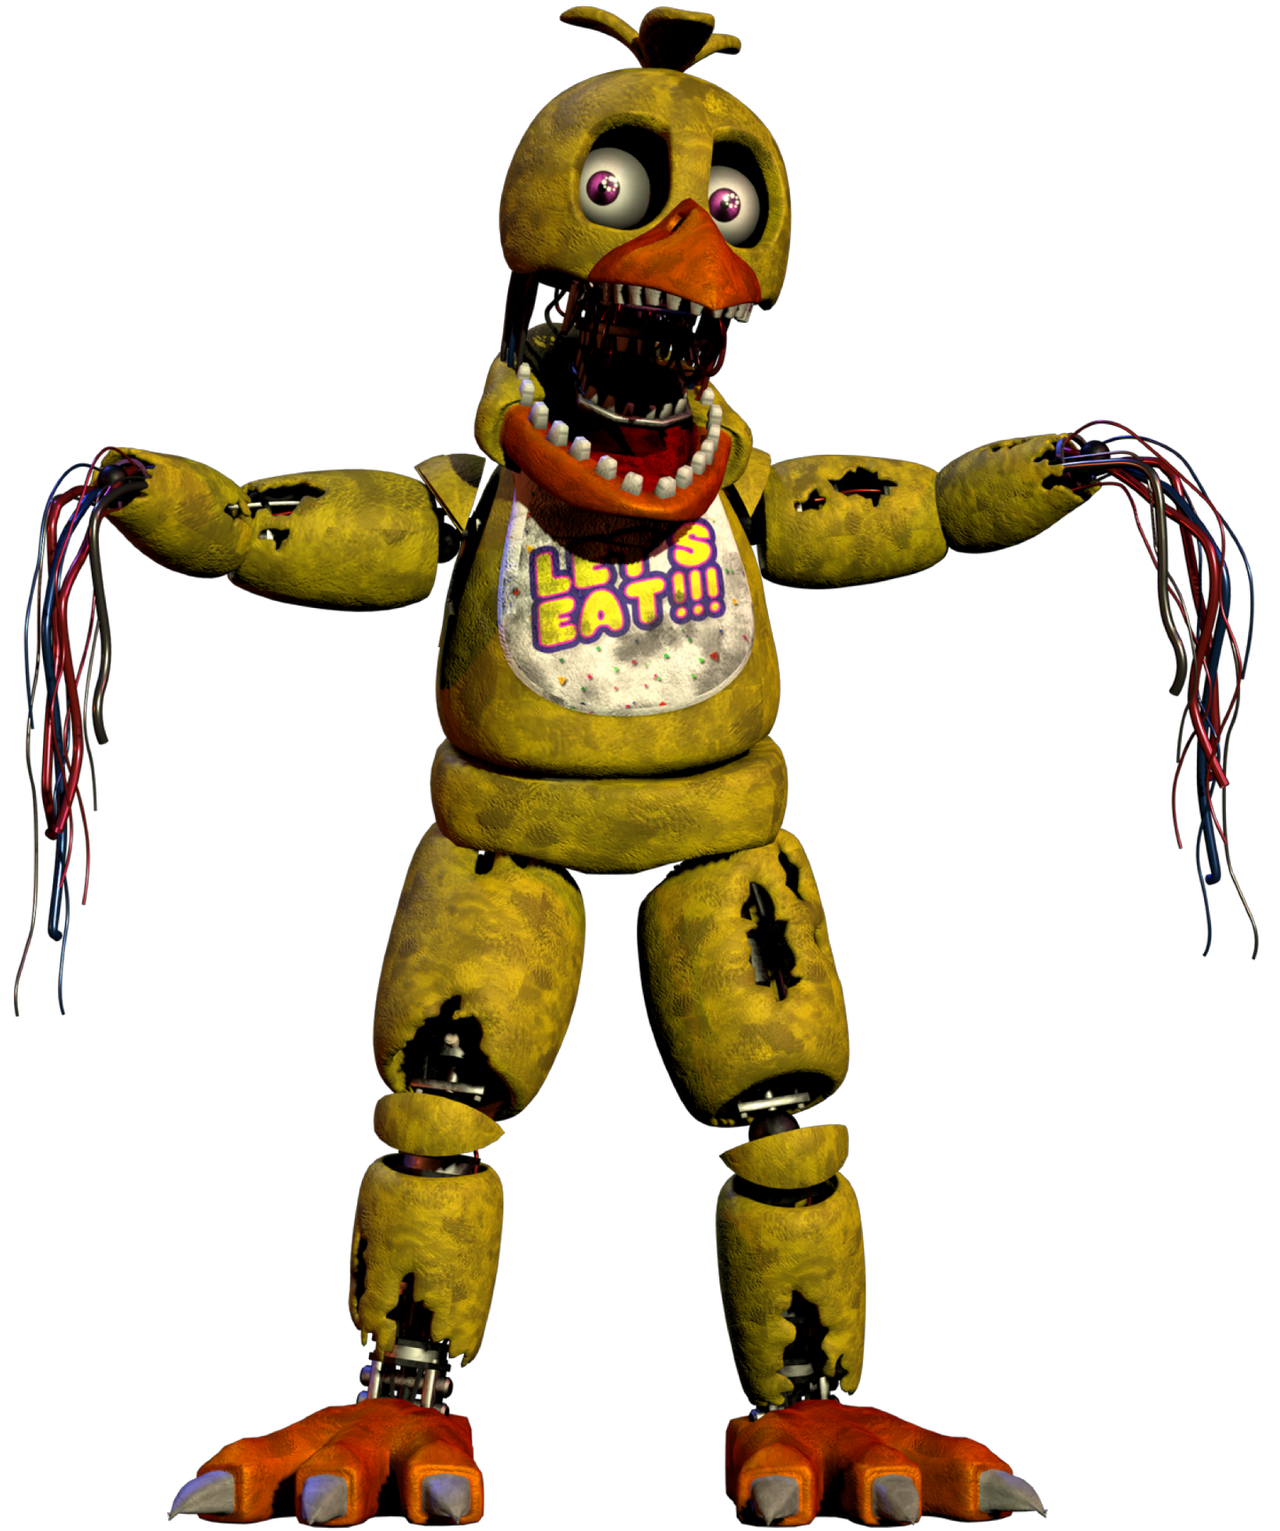 Withered Chica In Ultimate Custom Night by CandyTheCatBR on DeviantArt